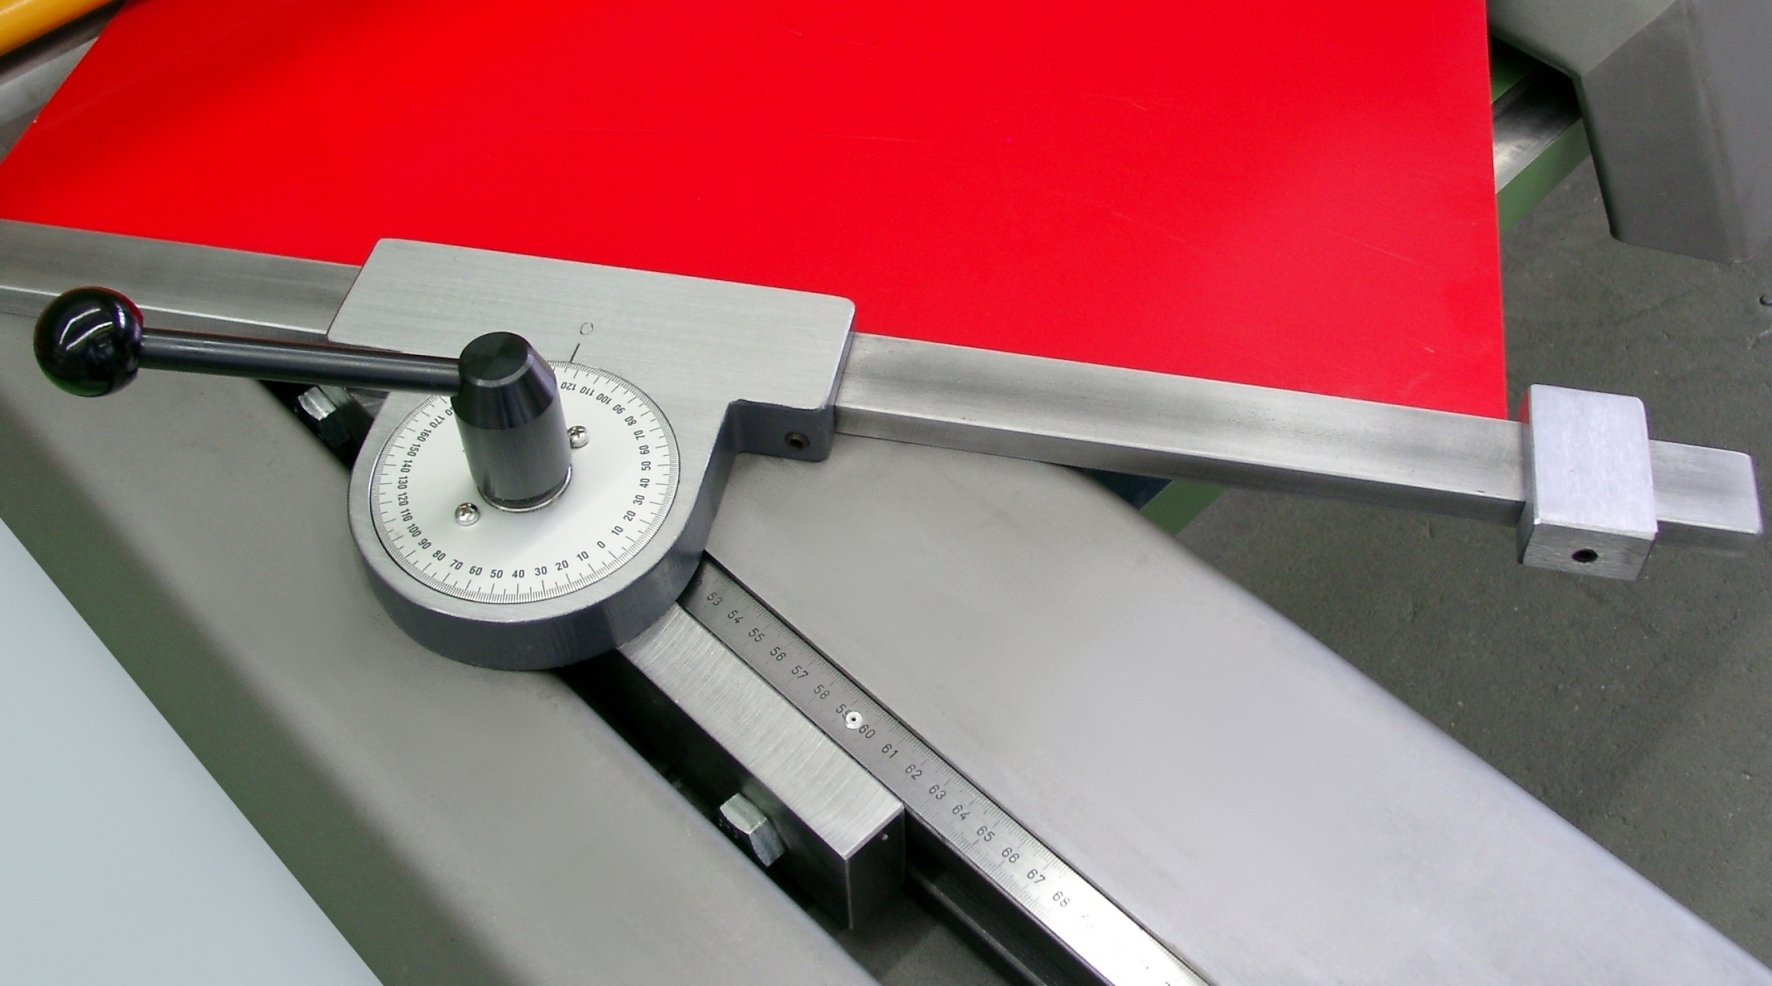 The adjustable squaring arm allows cutting inclined workpieces precisely and repeatable